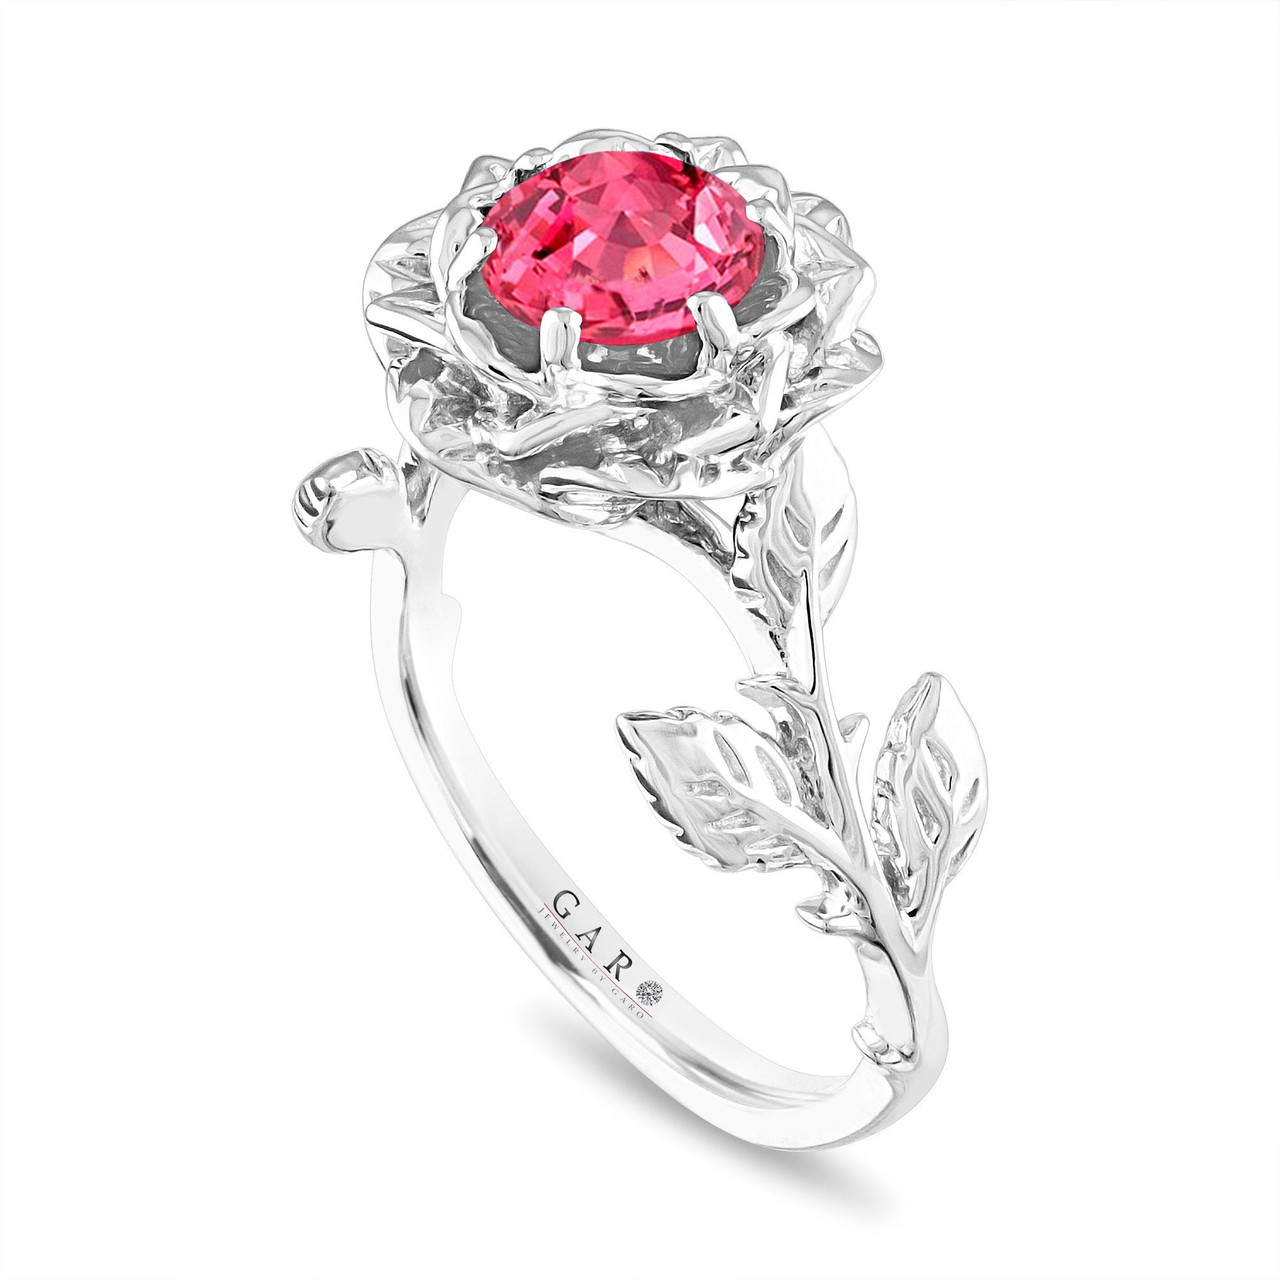 White Gold, Pink Sapphire and Diamond Flower Motif Ring